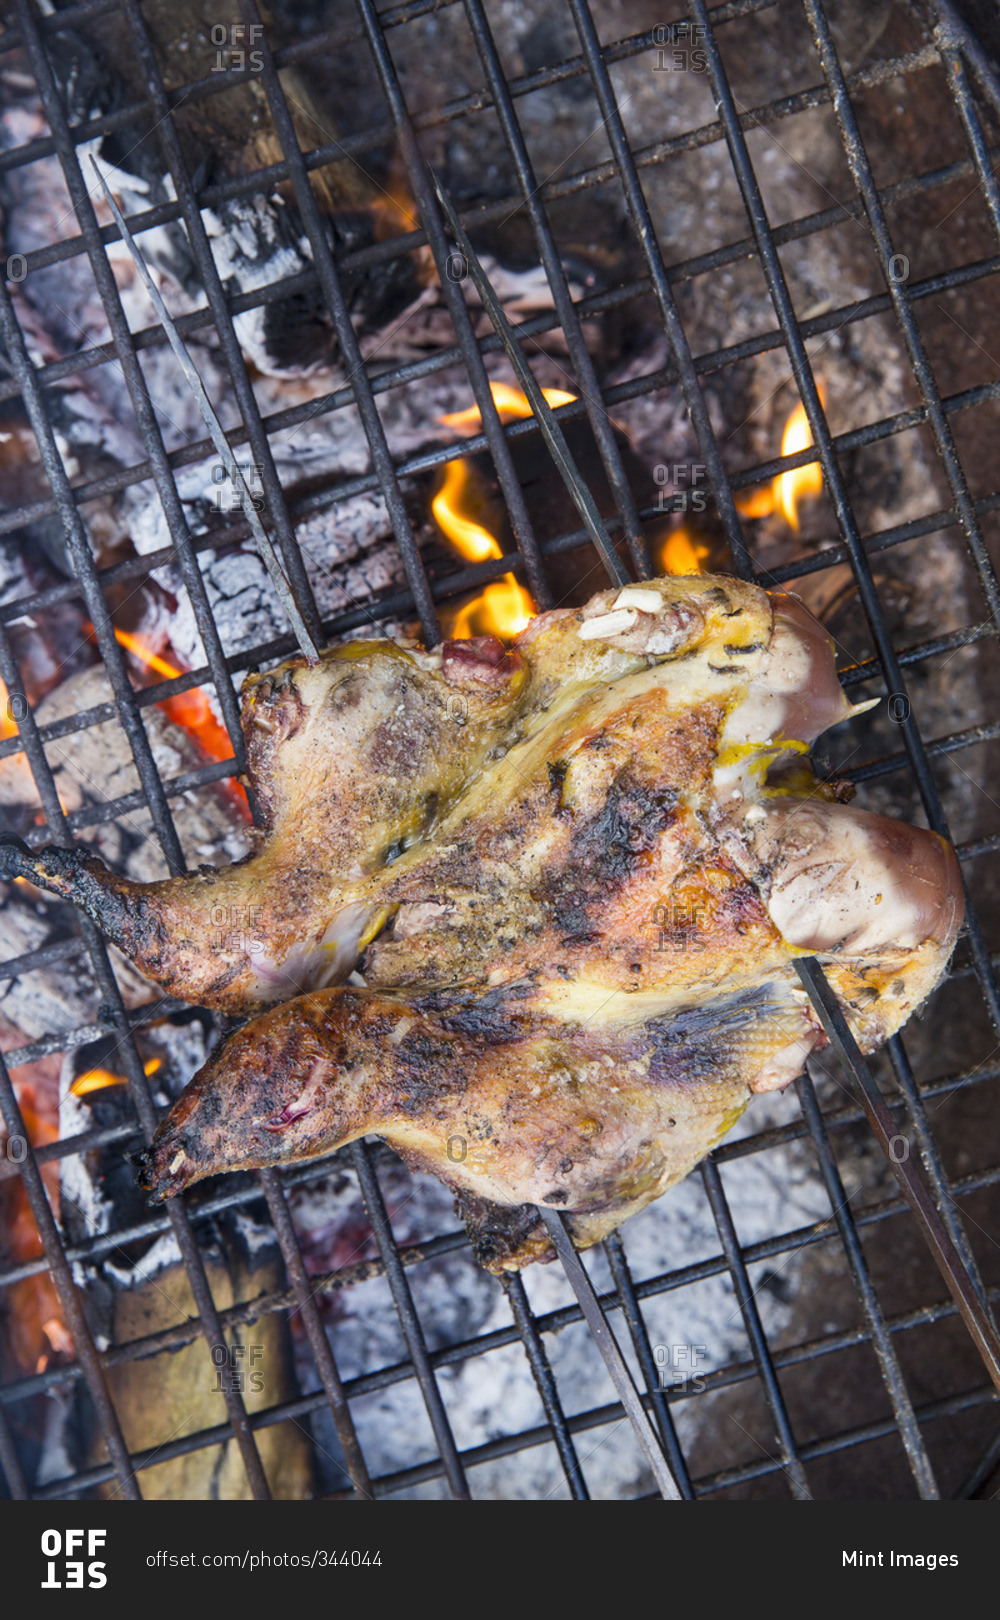 A spatchcocked game bird roasting above glowing coals